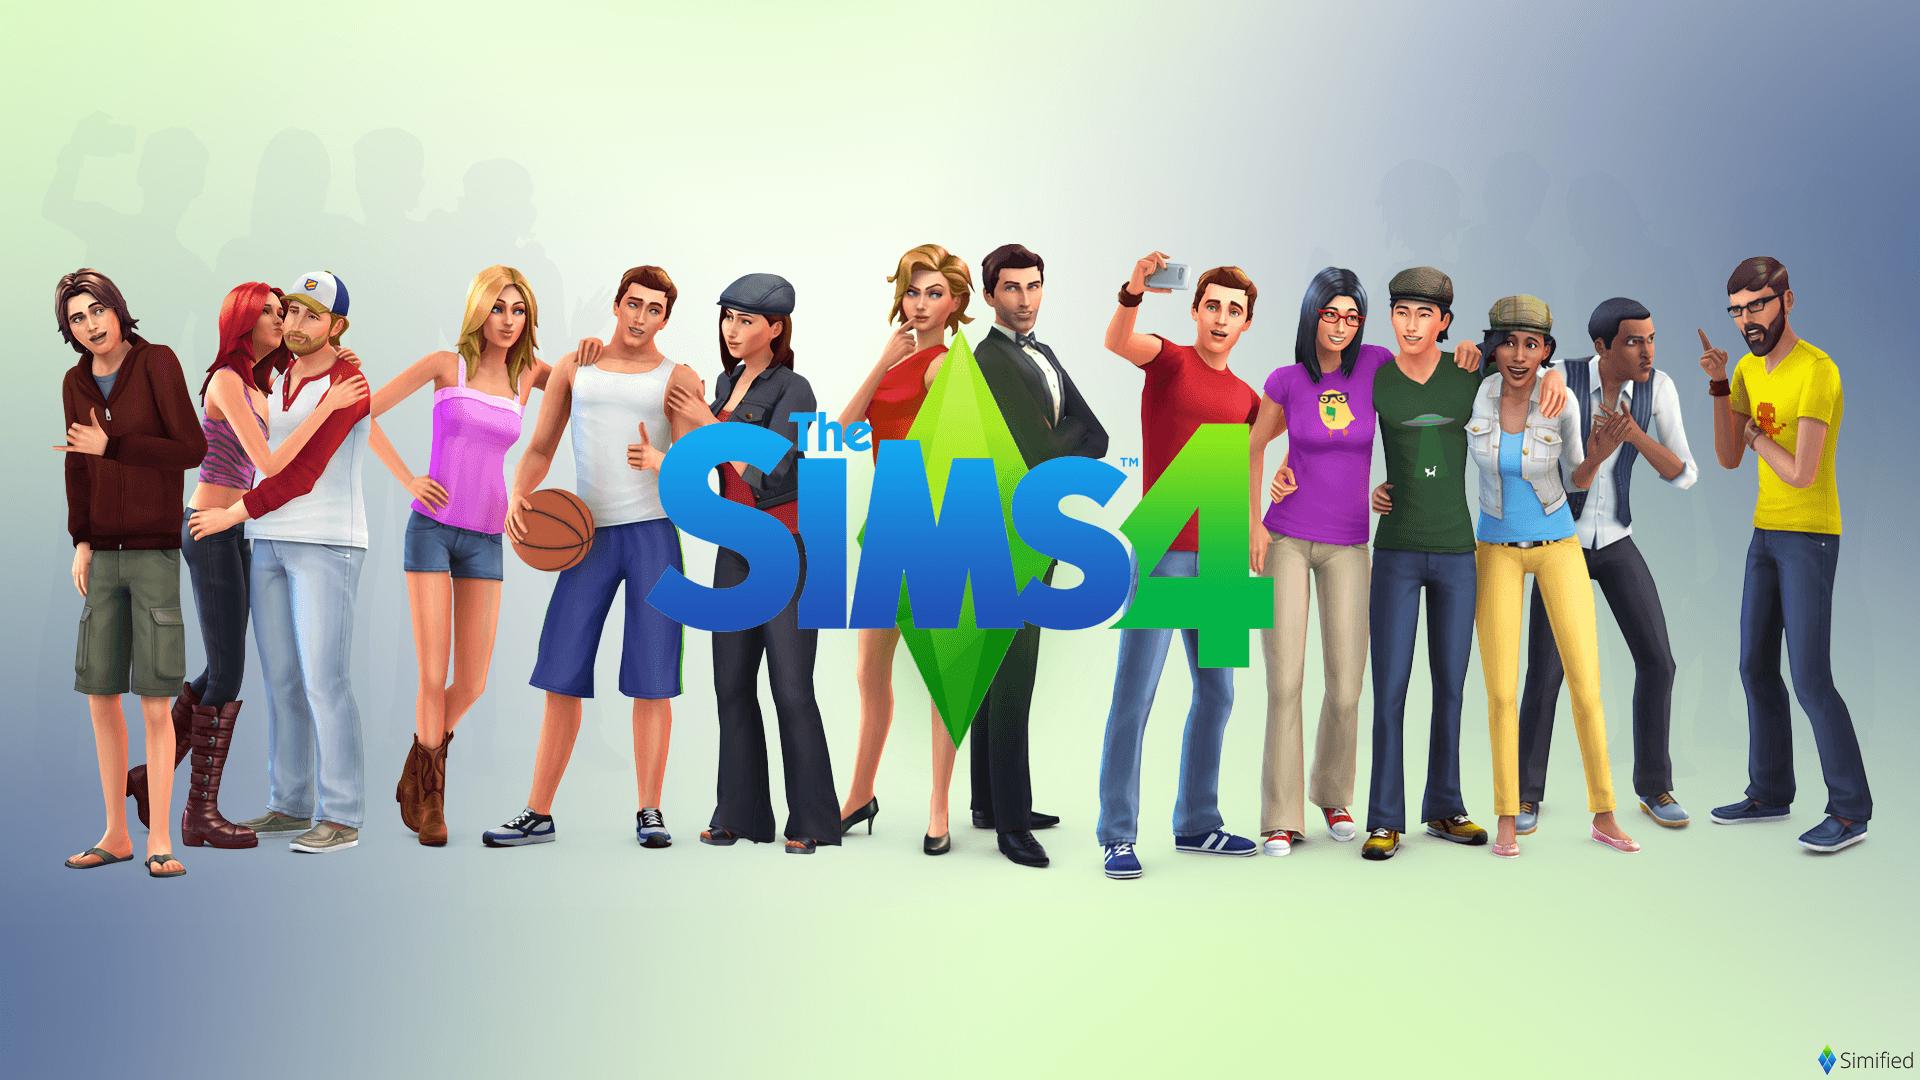 The Sims Free 4K Wallpapers